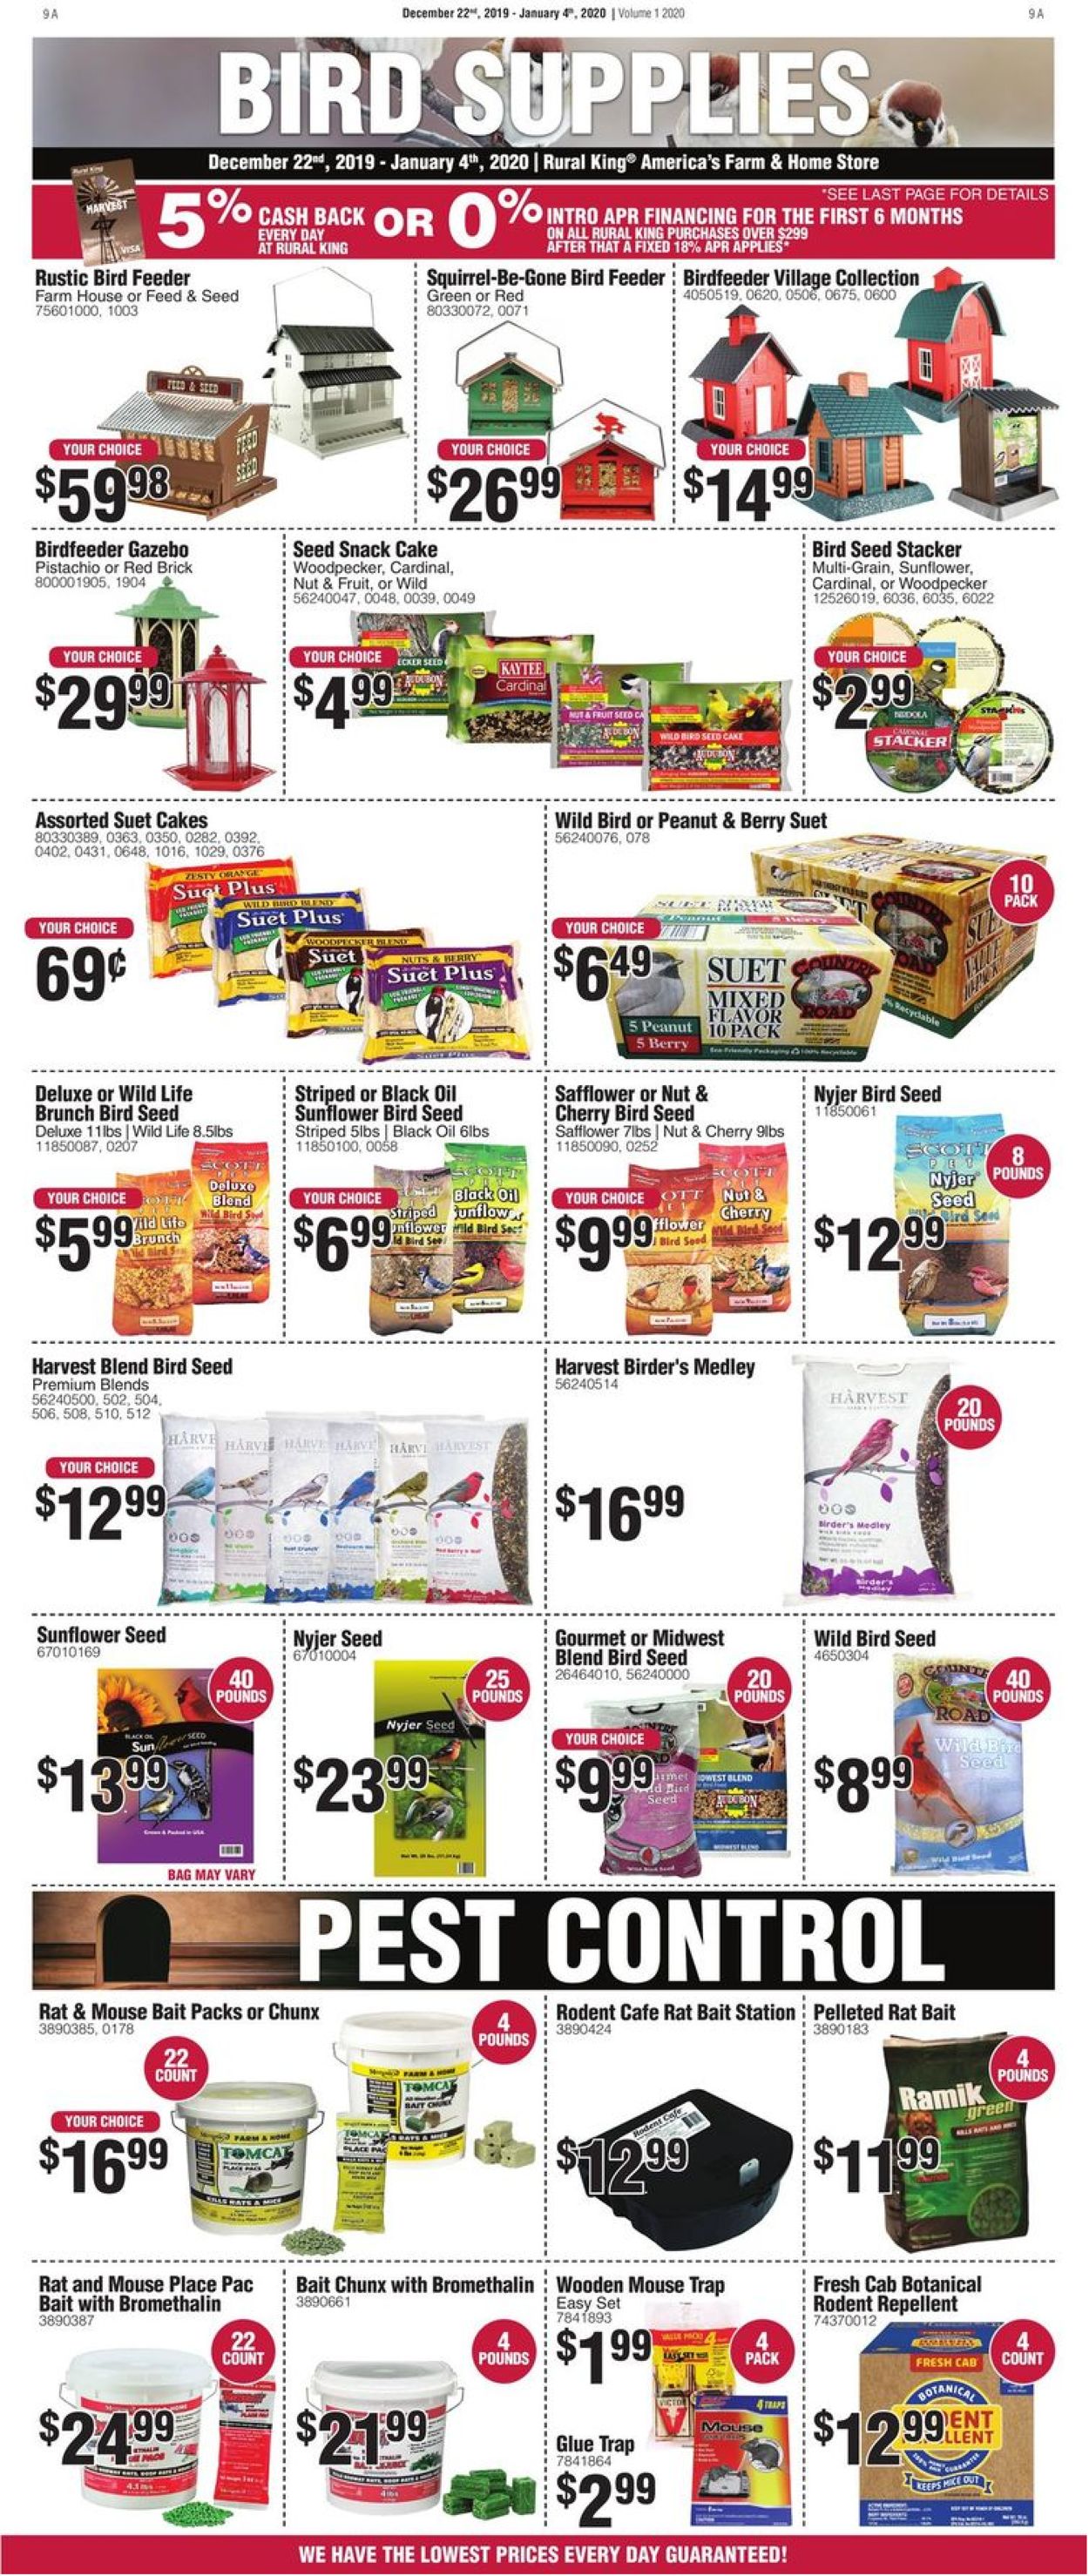 Rural King - Christmas & New Year's Ad 2019/2020 Current weekly ad 12/ ...